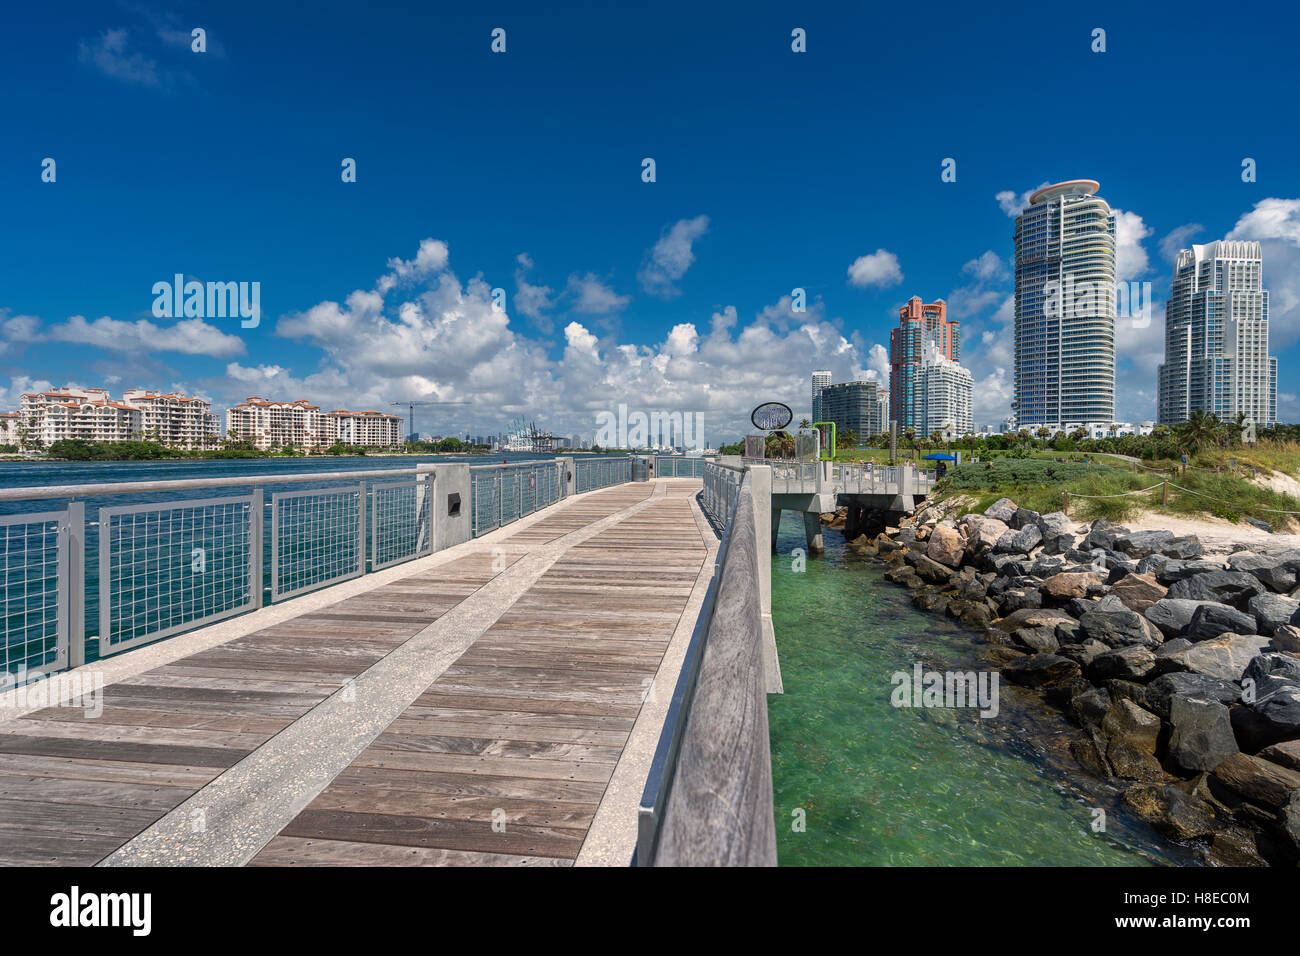 A beautiful Saturday afternoon in Miami’s South Pointe Pier. From here you can see the world famous Fisher Island. Stock Photo